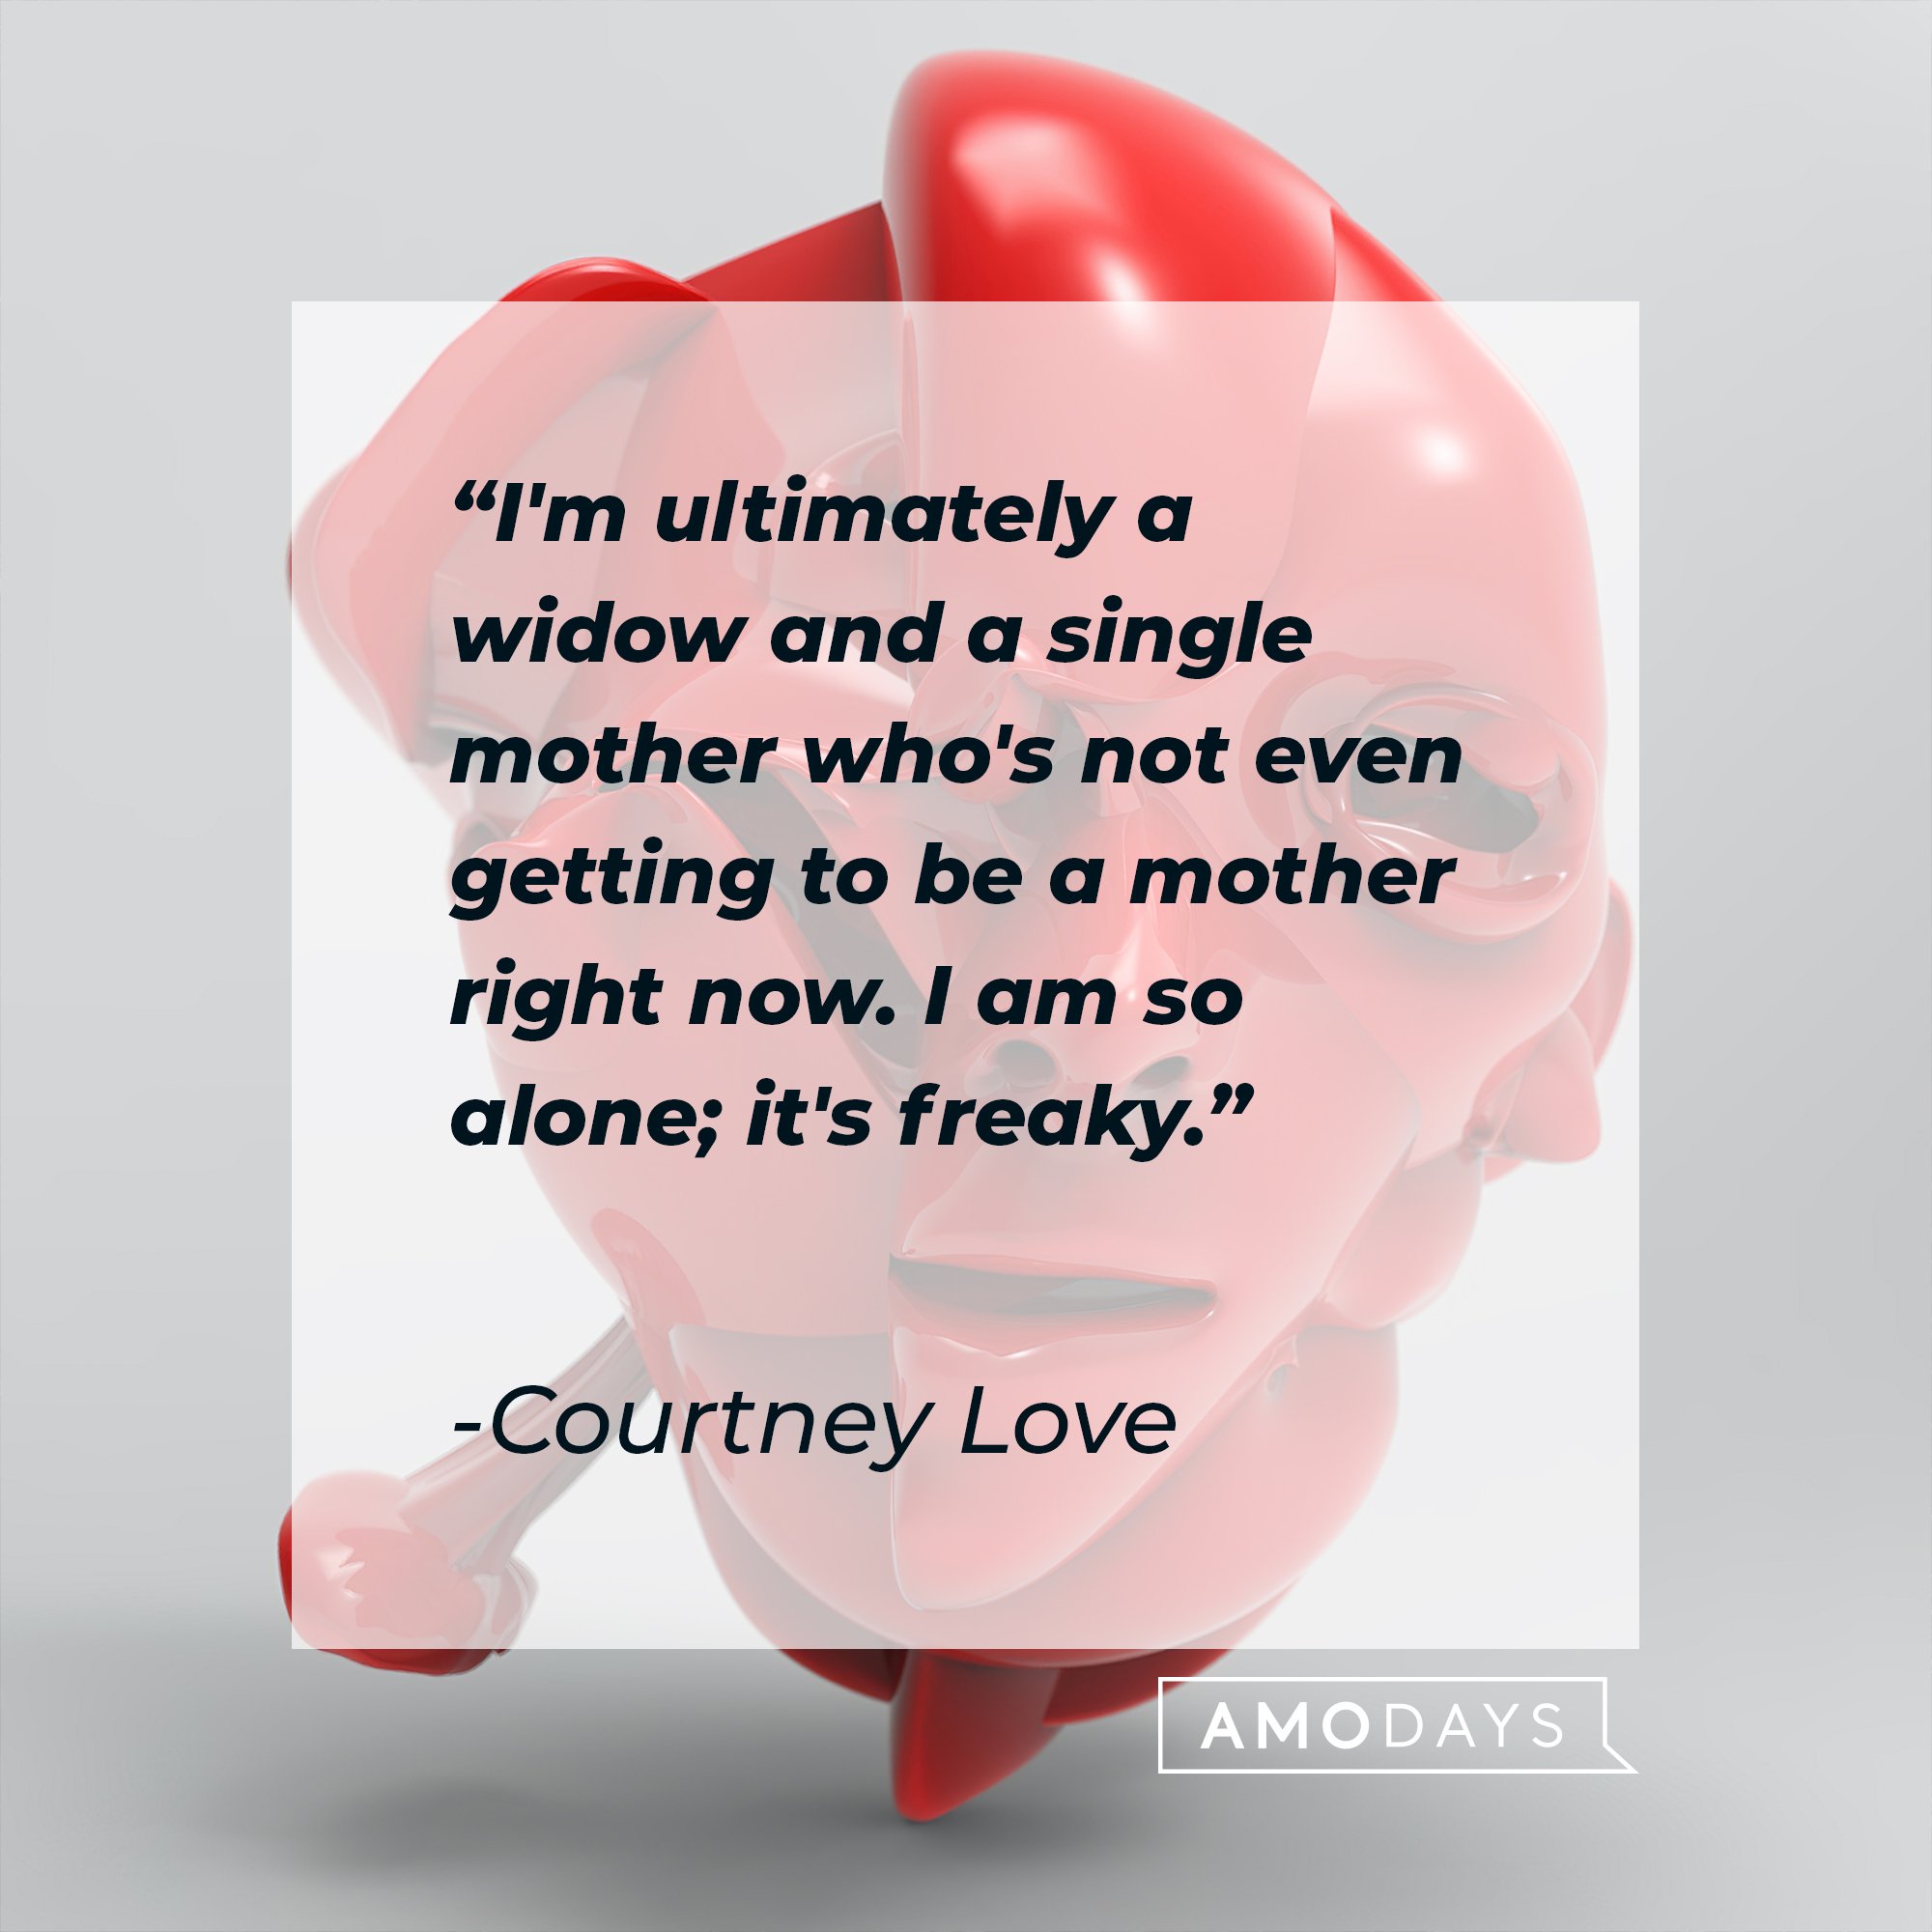 Courtney Love’s quote: "I'm ultimately a widow and a single mother who's not even getting to be a mother right now. I am so alone; it's freaky." | Image: AmoDays